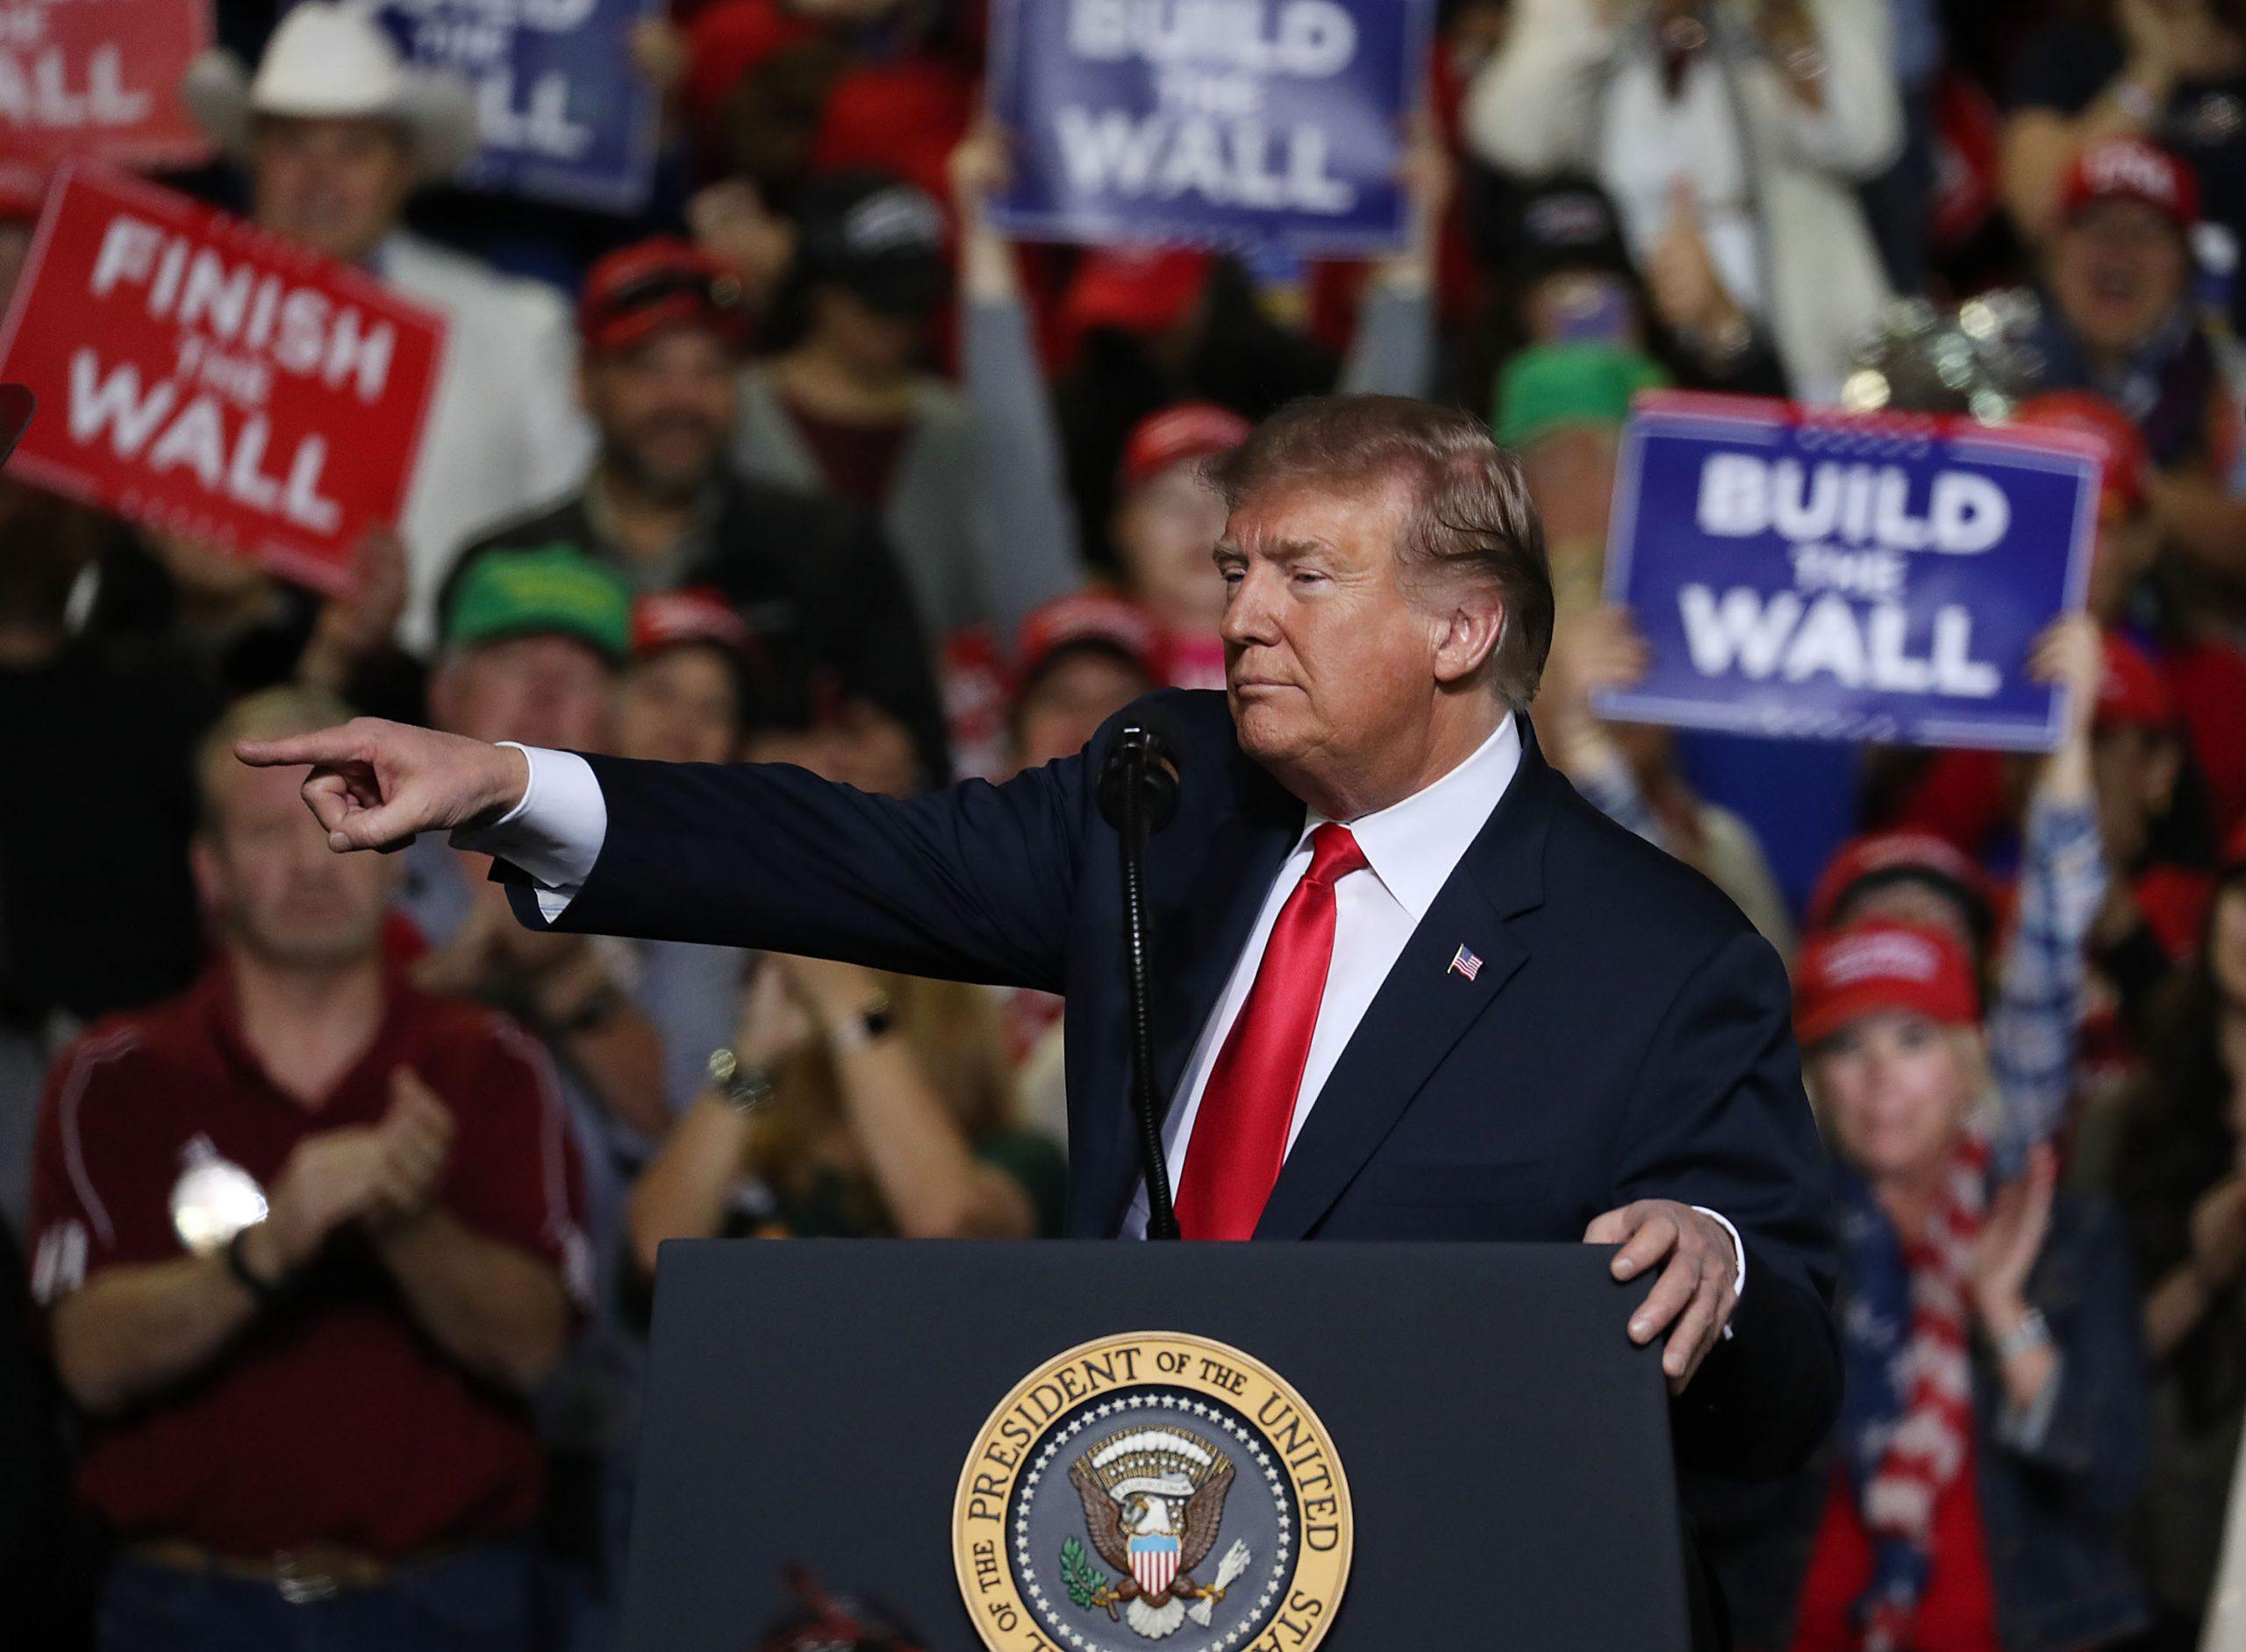 U.S. President Donald Trump speaks during a rally at the  El Paso County Coliseum on Feb. 11, 2019 in El Paso, Texas. Trump continues his campaign for a wall to be built along the border as the Democrats in Congress are asking for other border security measures. (Joe Raedle/Getty Images/TNS)